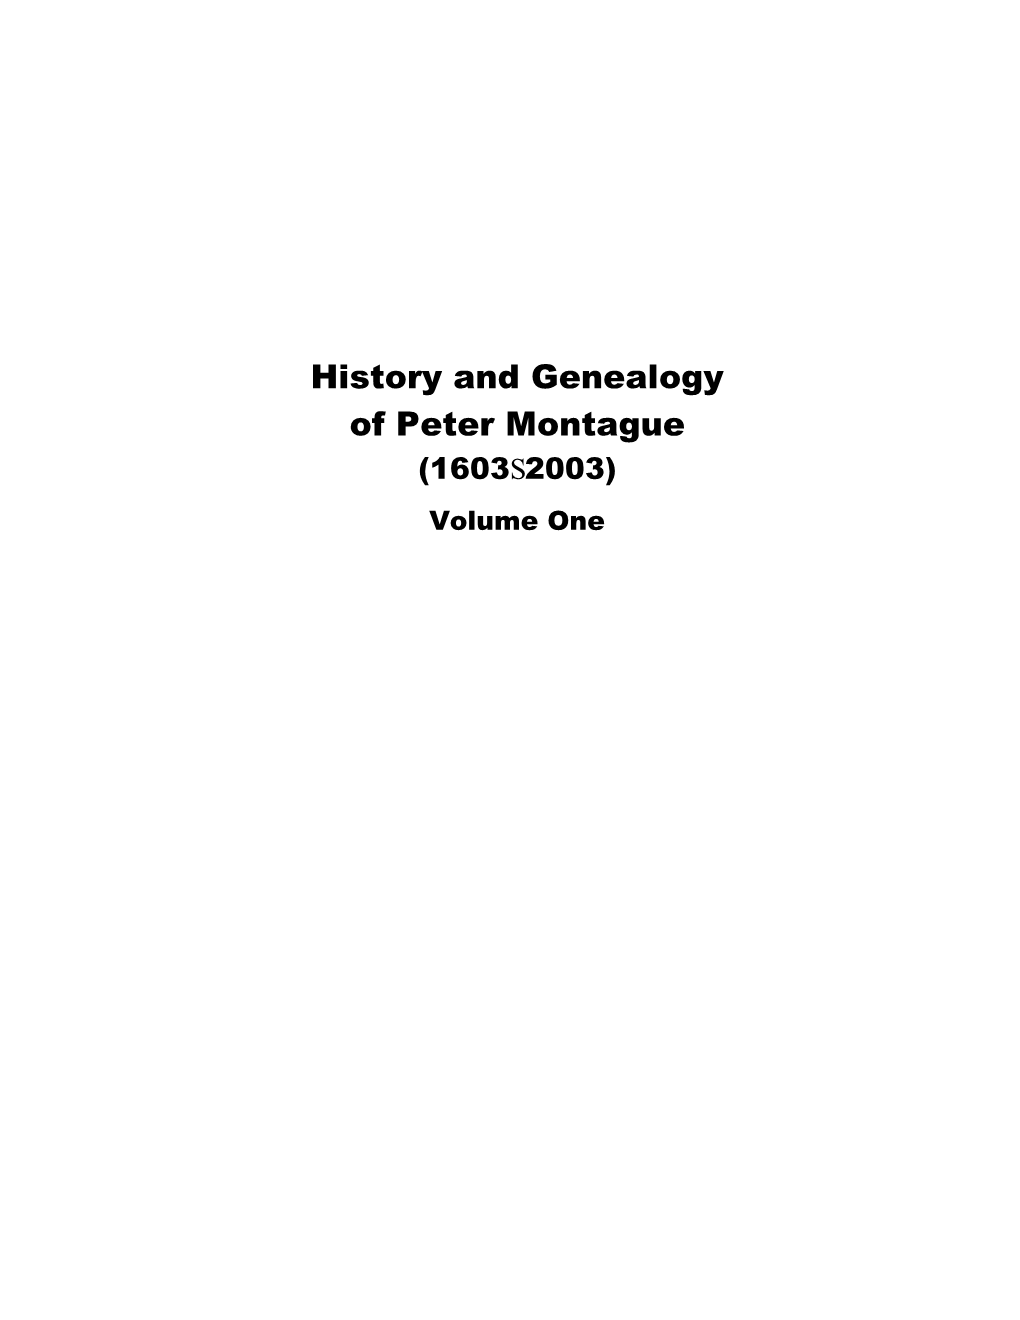 History and Genealogy of Peter Montague (1603S2003) Volume One